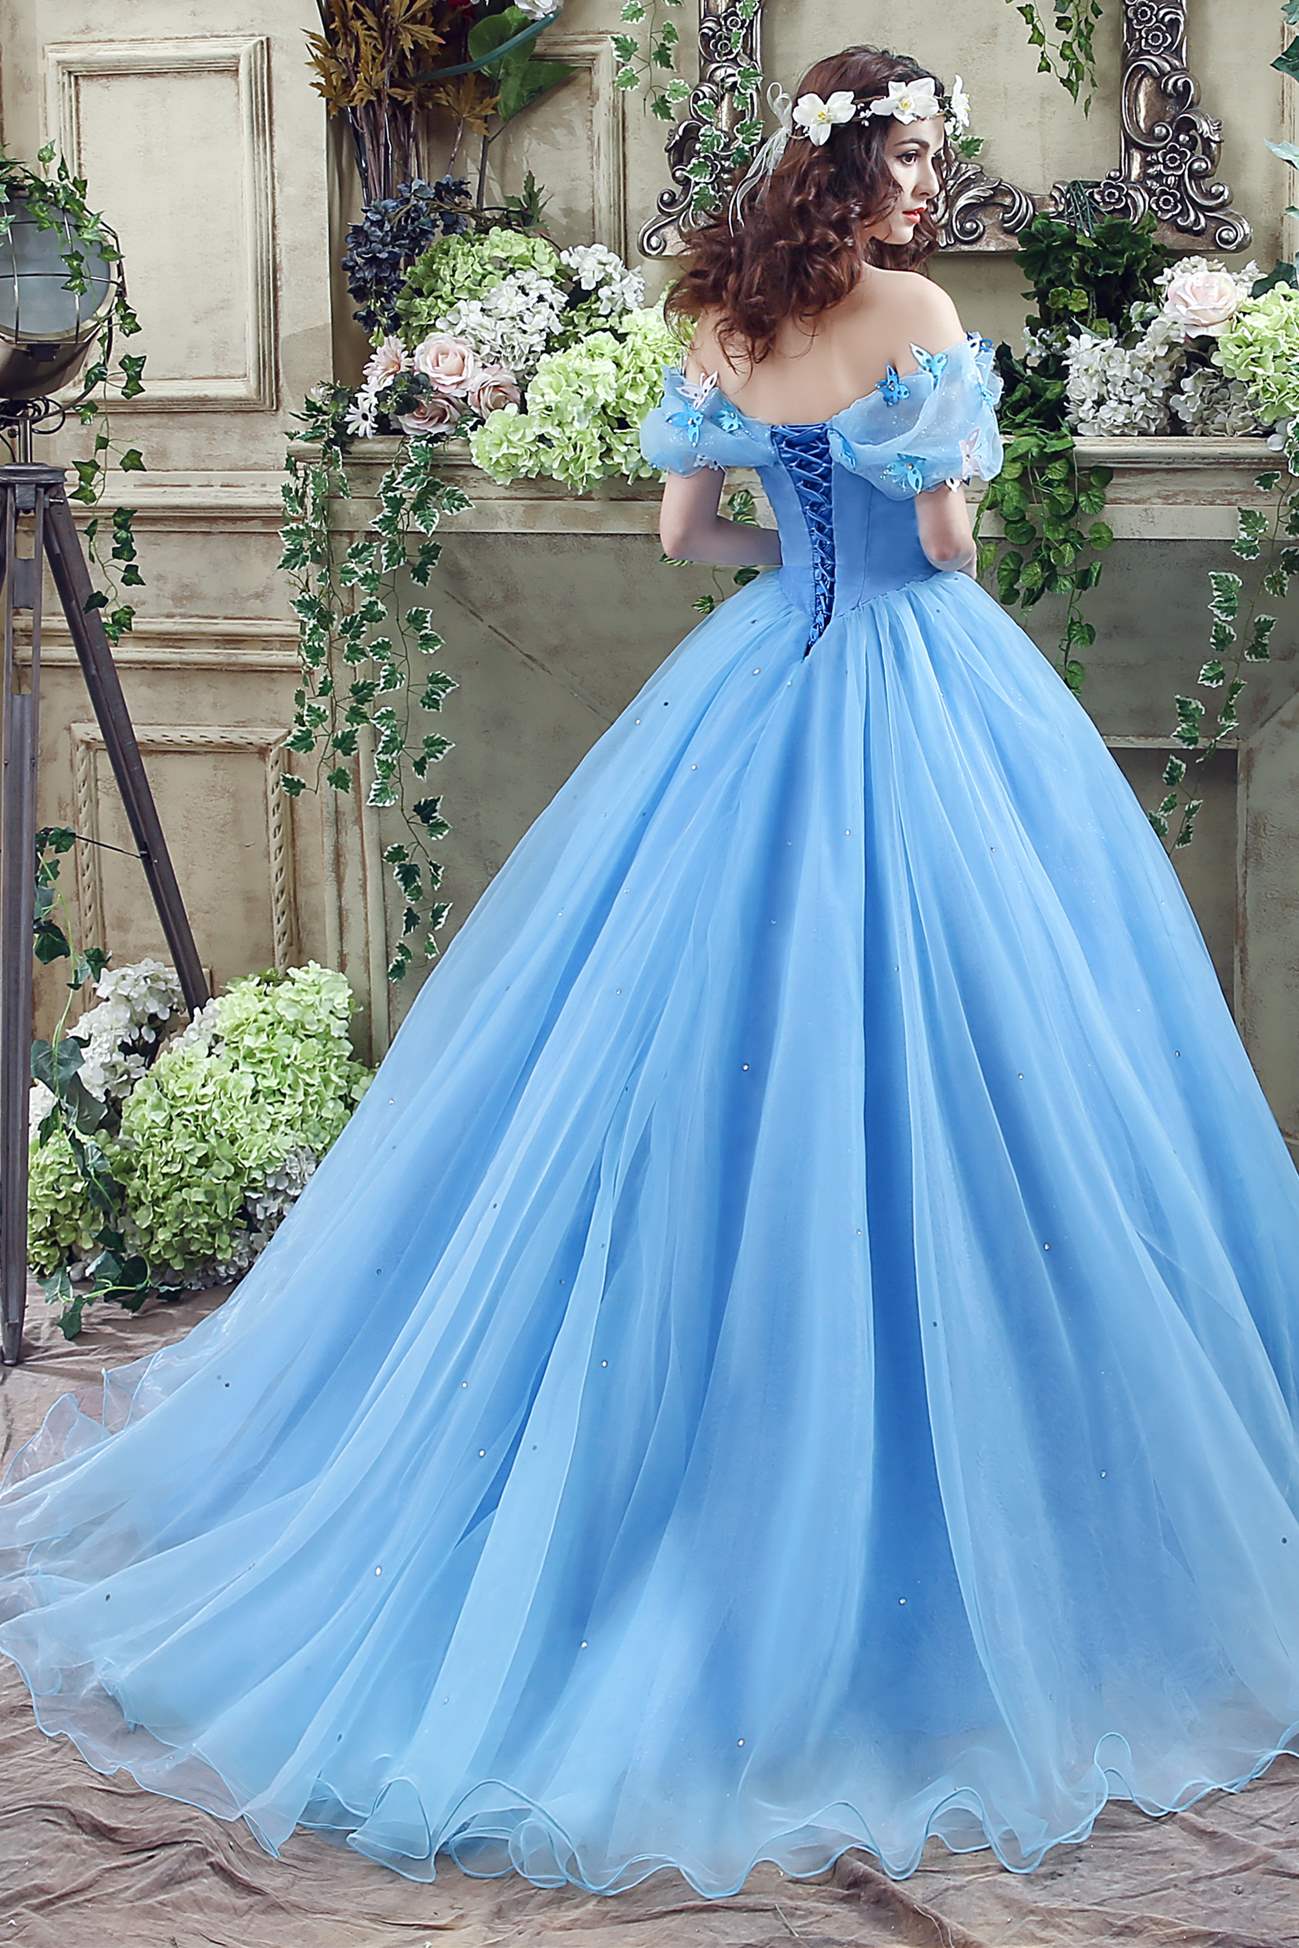 2021 Blue Ball Gown Prom Dress New Movie Princess Cinderella Cosplay Dress  Off The Shoulder Organza Long Prom Gown Prom Dress | Lazada PH